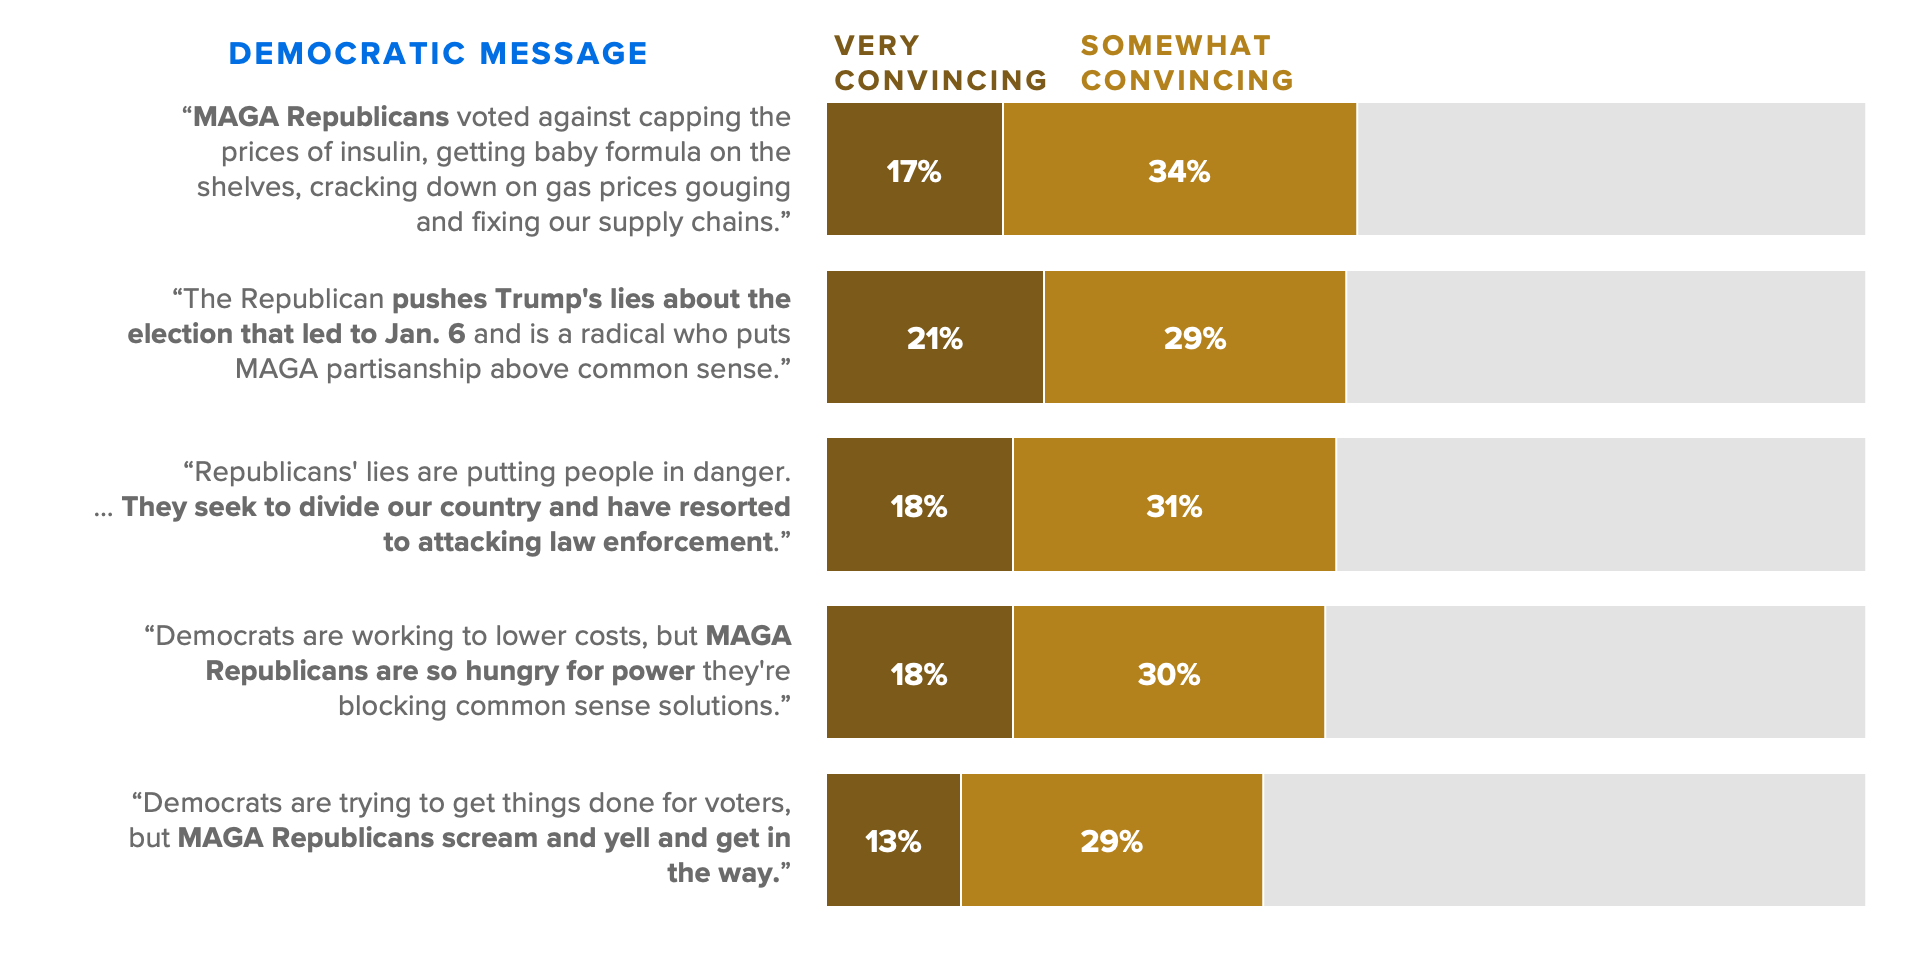 Charts showing how convincing voters found various forms of Democratic messaging